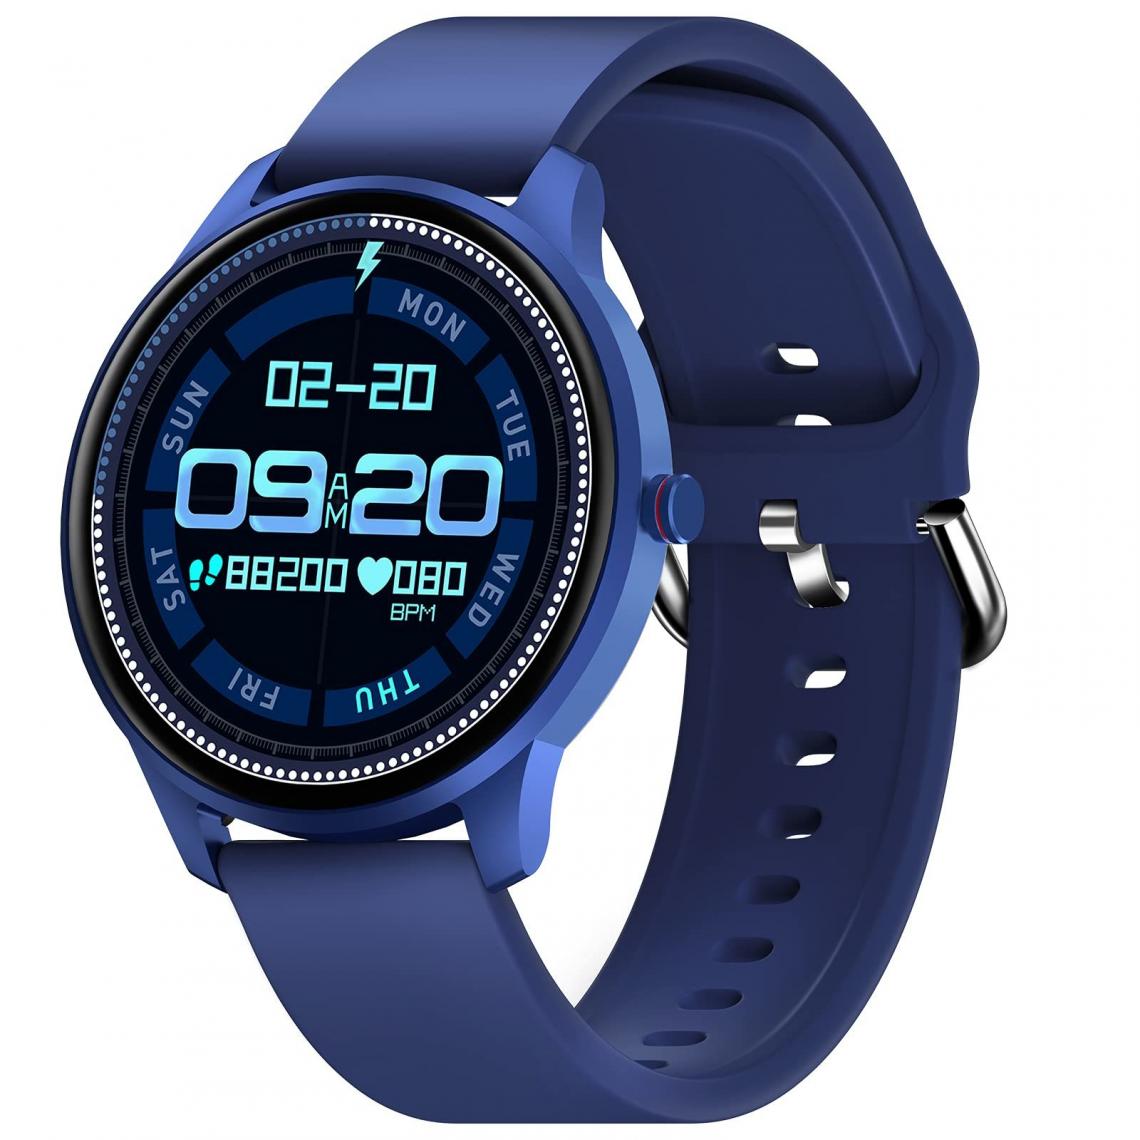 Chronotech Montres - Chronus Smart Watch with 1.3 inch Touch Screen Smart Watch for Men Women Waterproof IP68, Heart Rate Monitor Pedometer Sleep for Android / iOS / iPhone(Blue) - Montre connectée